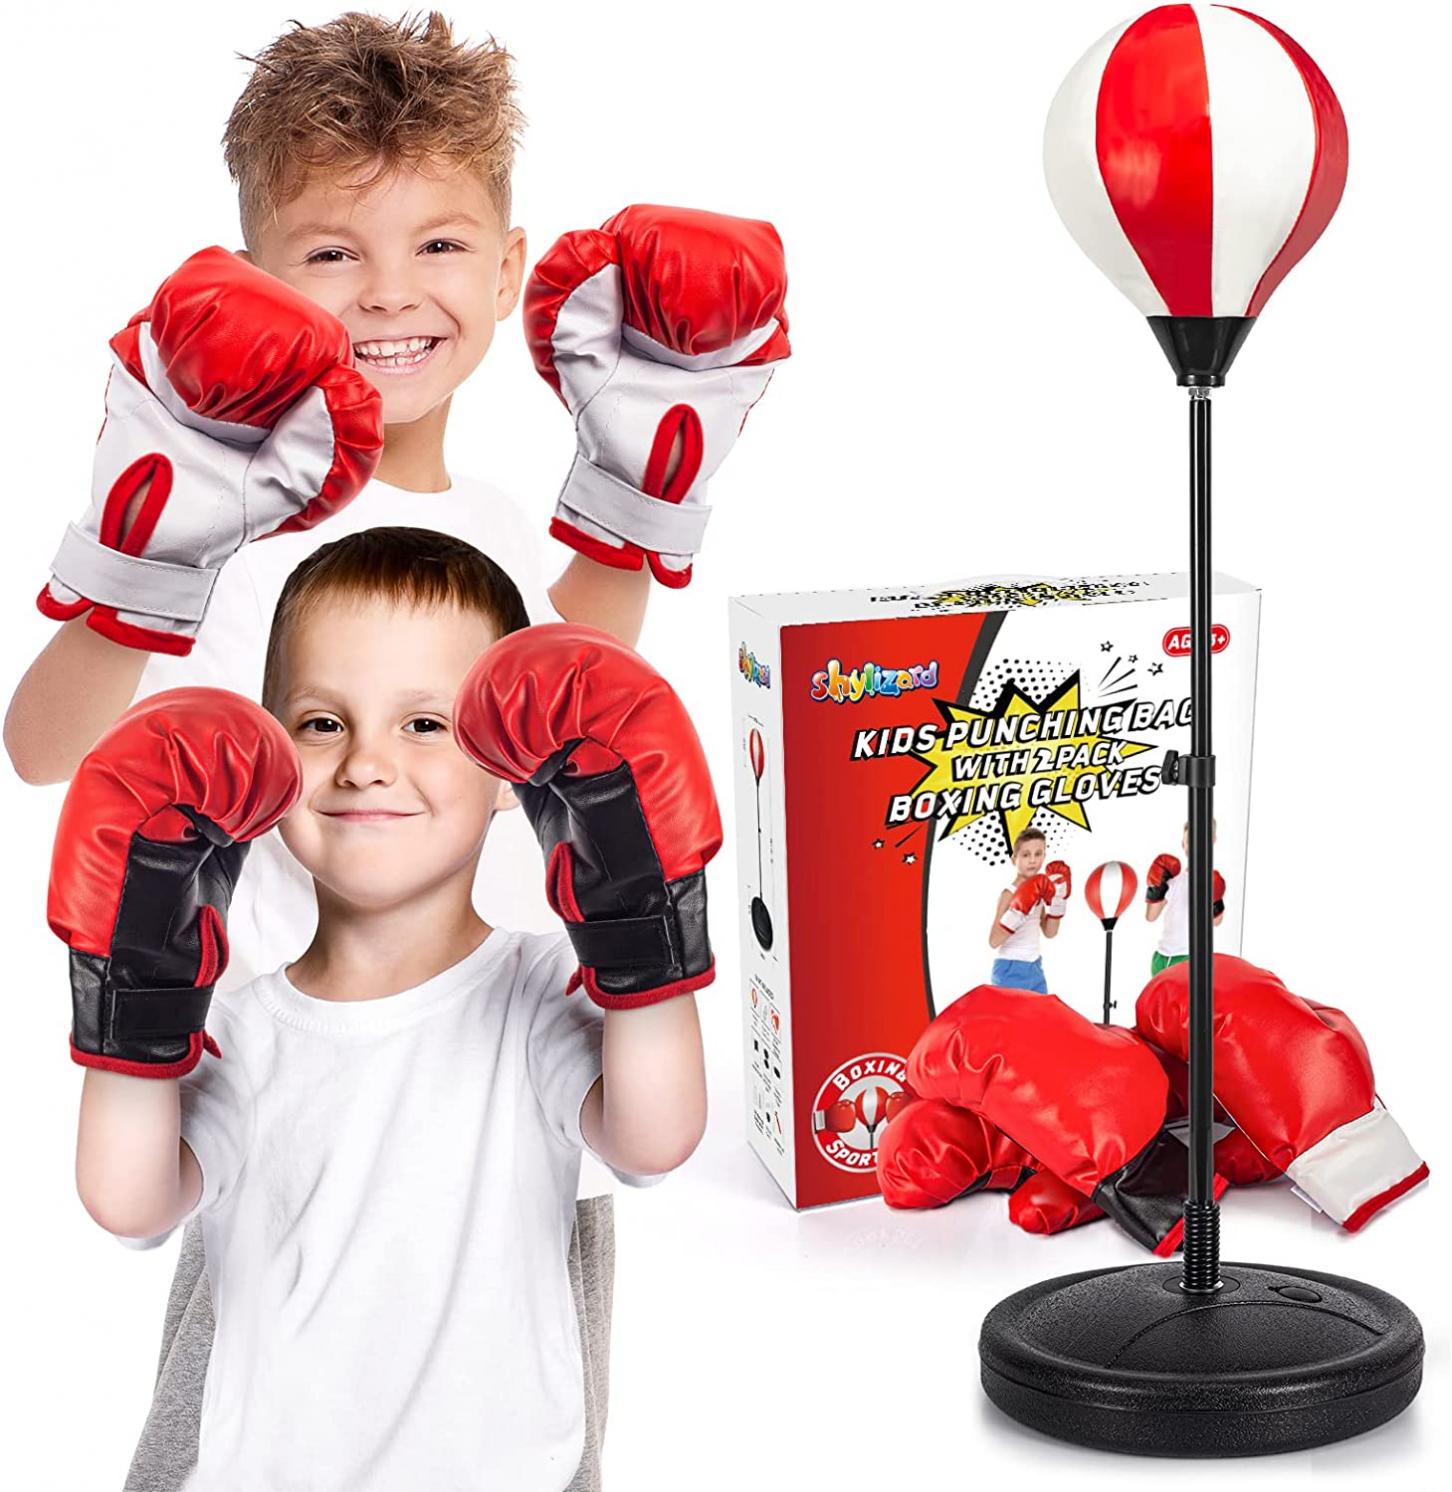 ShyLizard Punching Bag for Kids Included 2 Pack Boxing Gloves, Boxing Toys for Boys, Boxing Bag Sets with Height Adjustable Stand, Gifts for Boys & Girls Age 5,6,7,8,9,10 Years Old